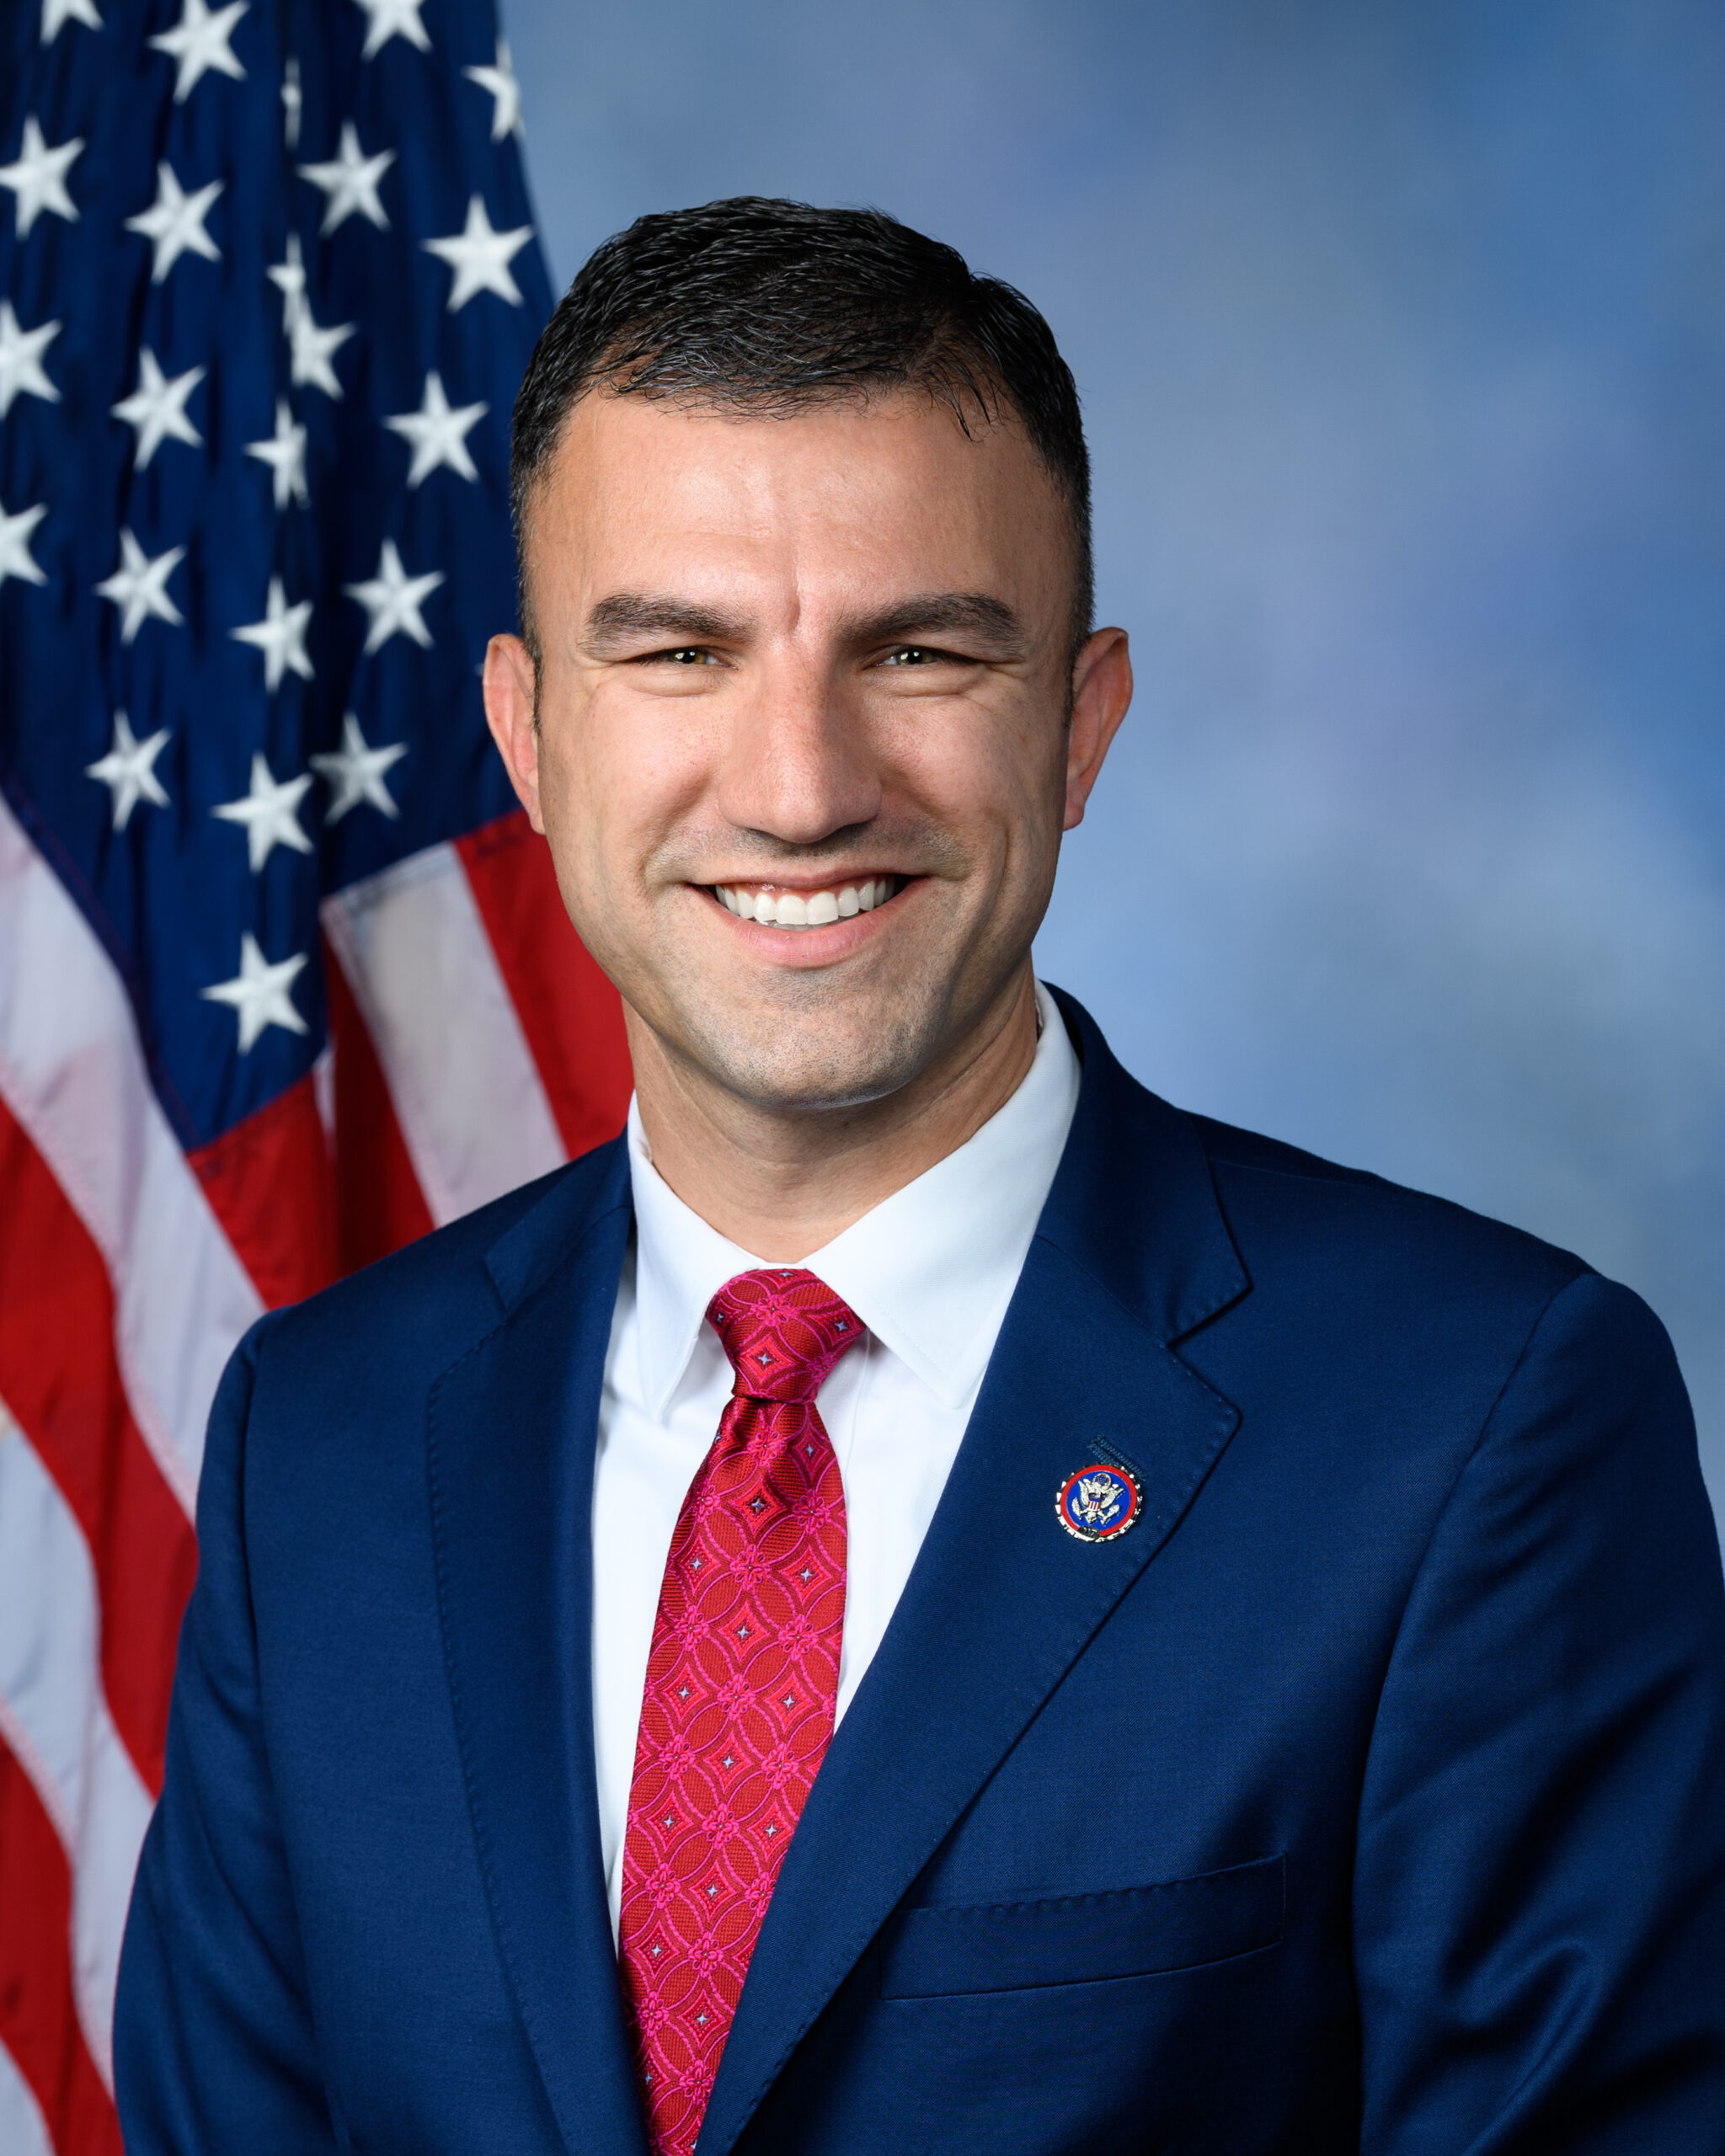 Image of Yakym, Rudy, U.S. House of Representatives, Republican Party, Indiana